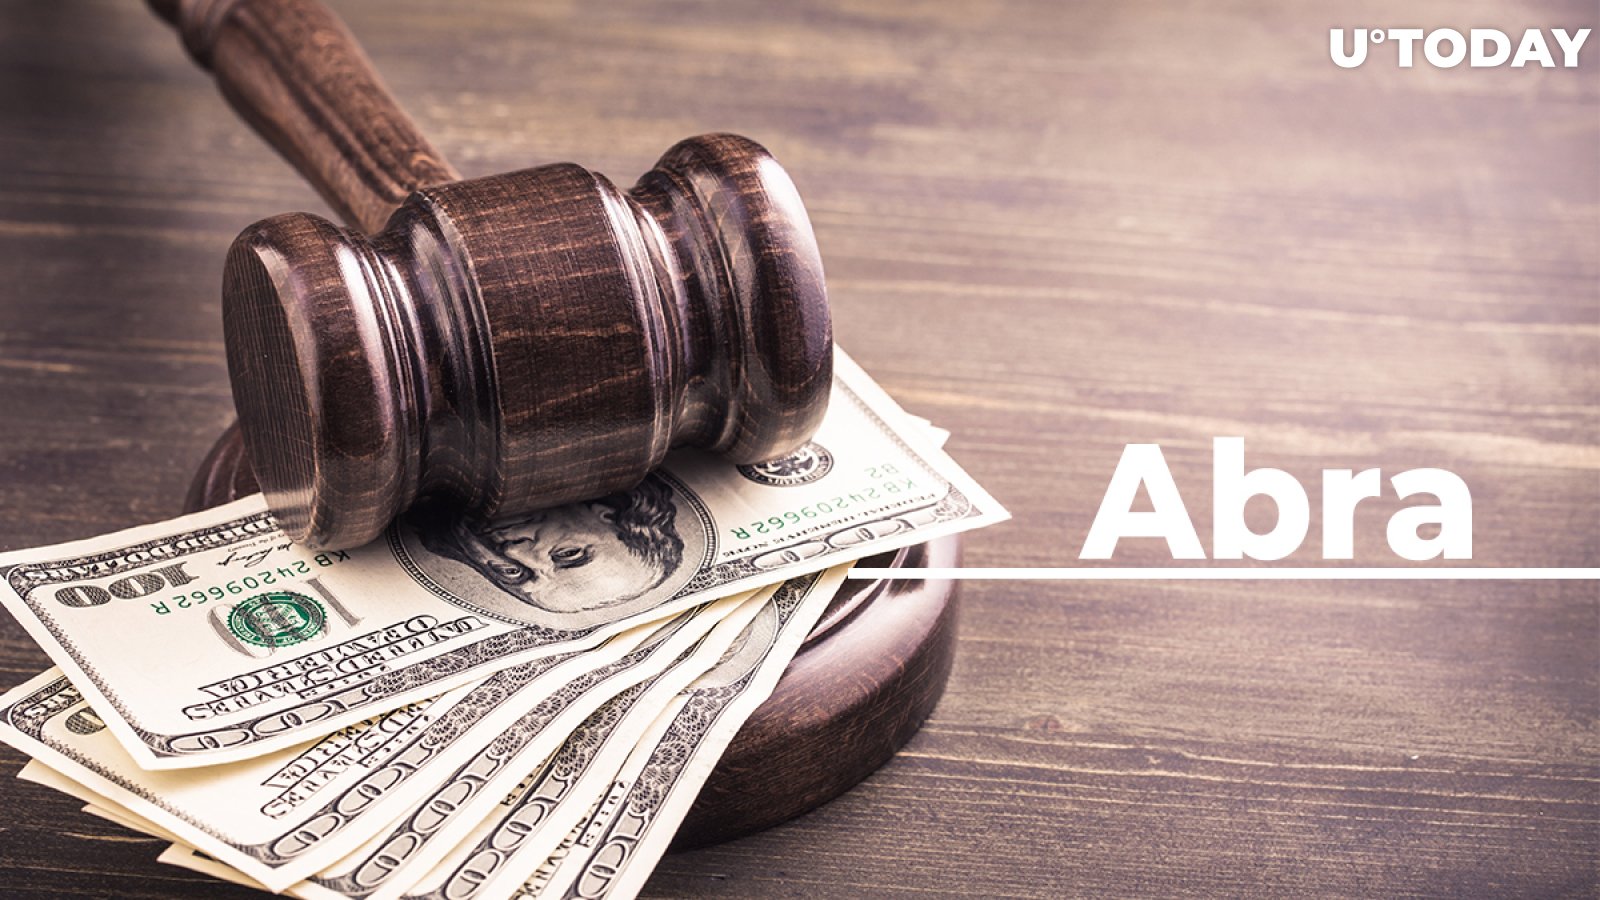 Crypto Investment App Abra Gets Charged by SEC, Agrees to Pay $150,000 